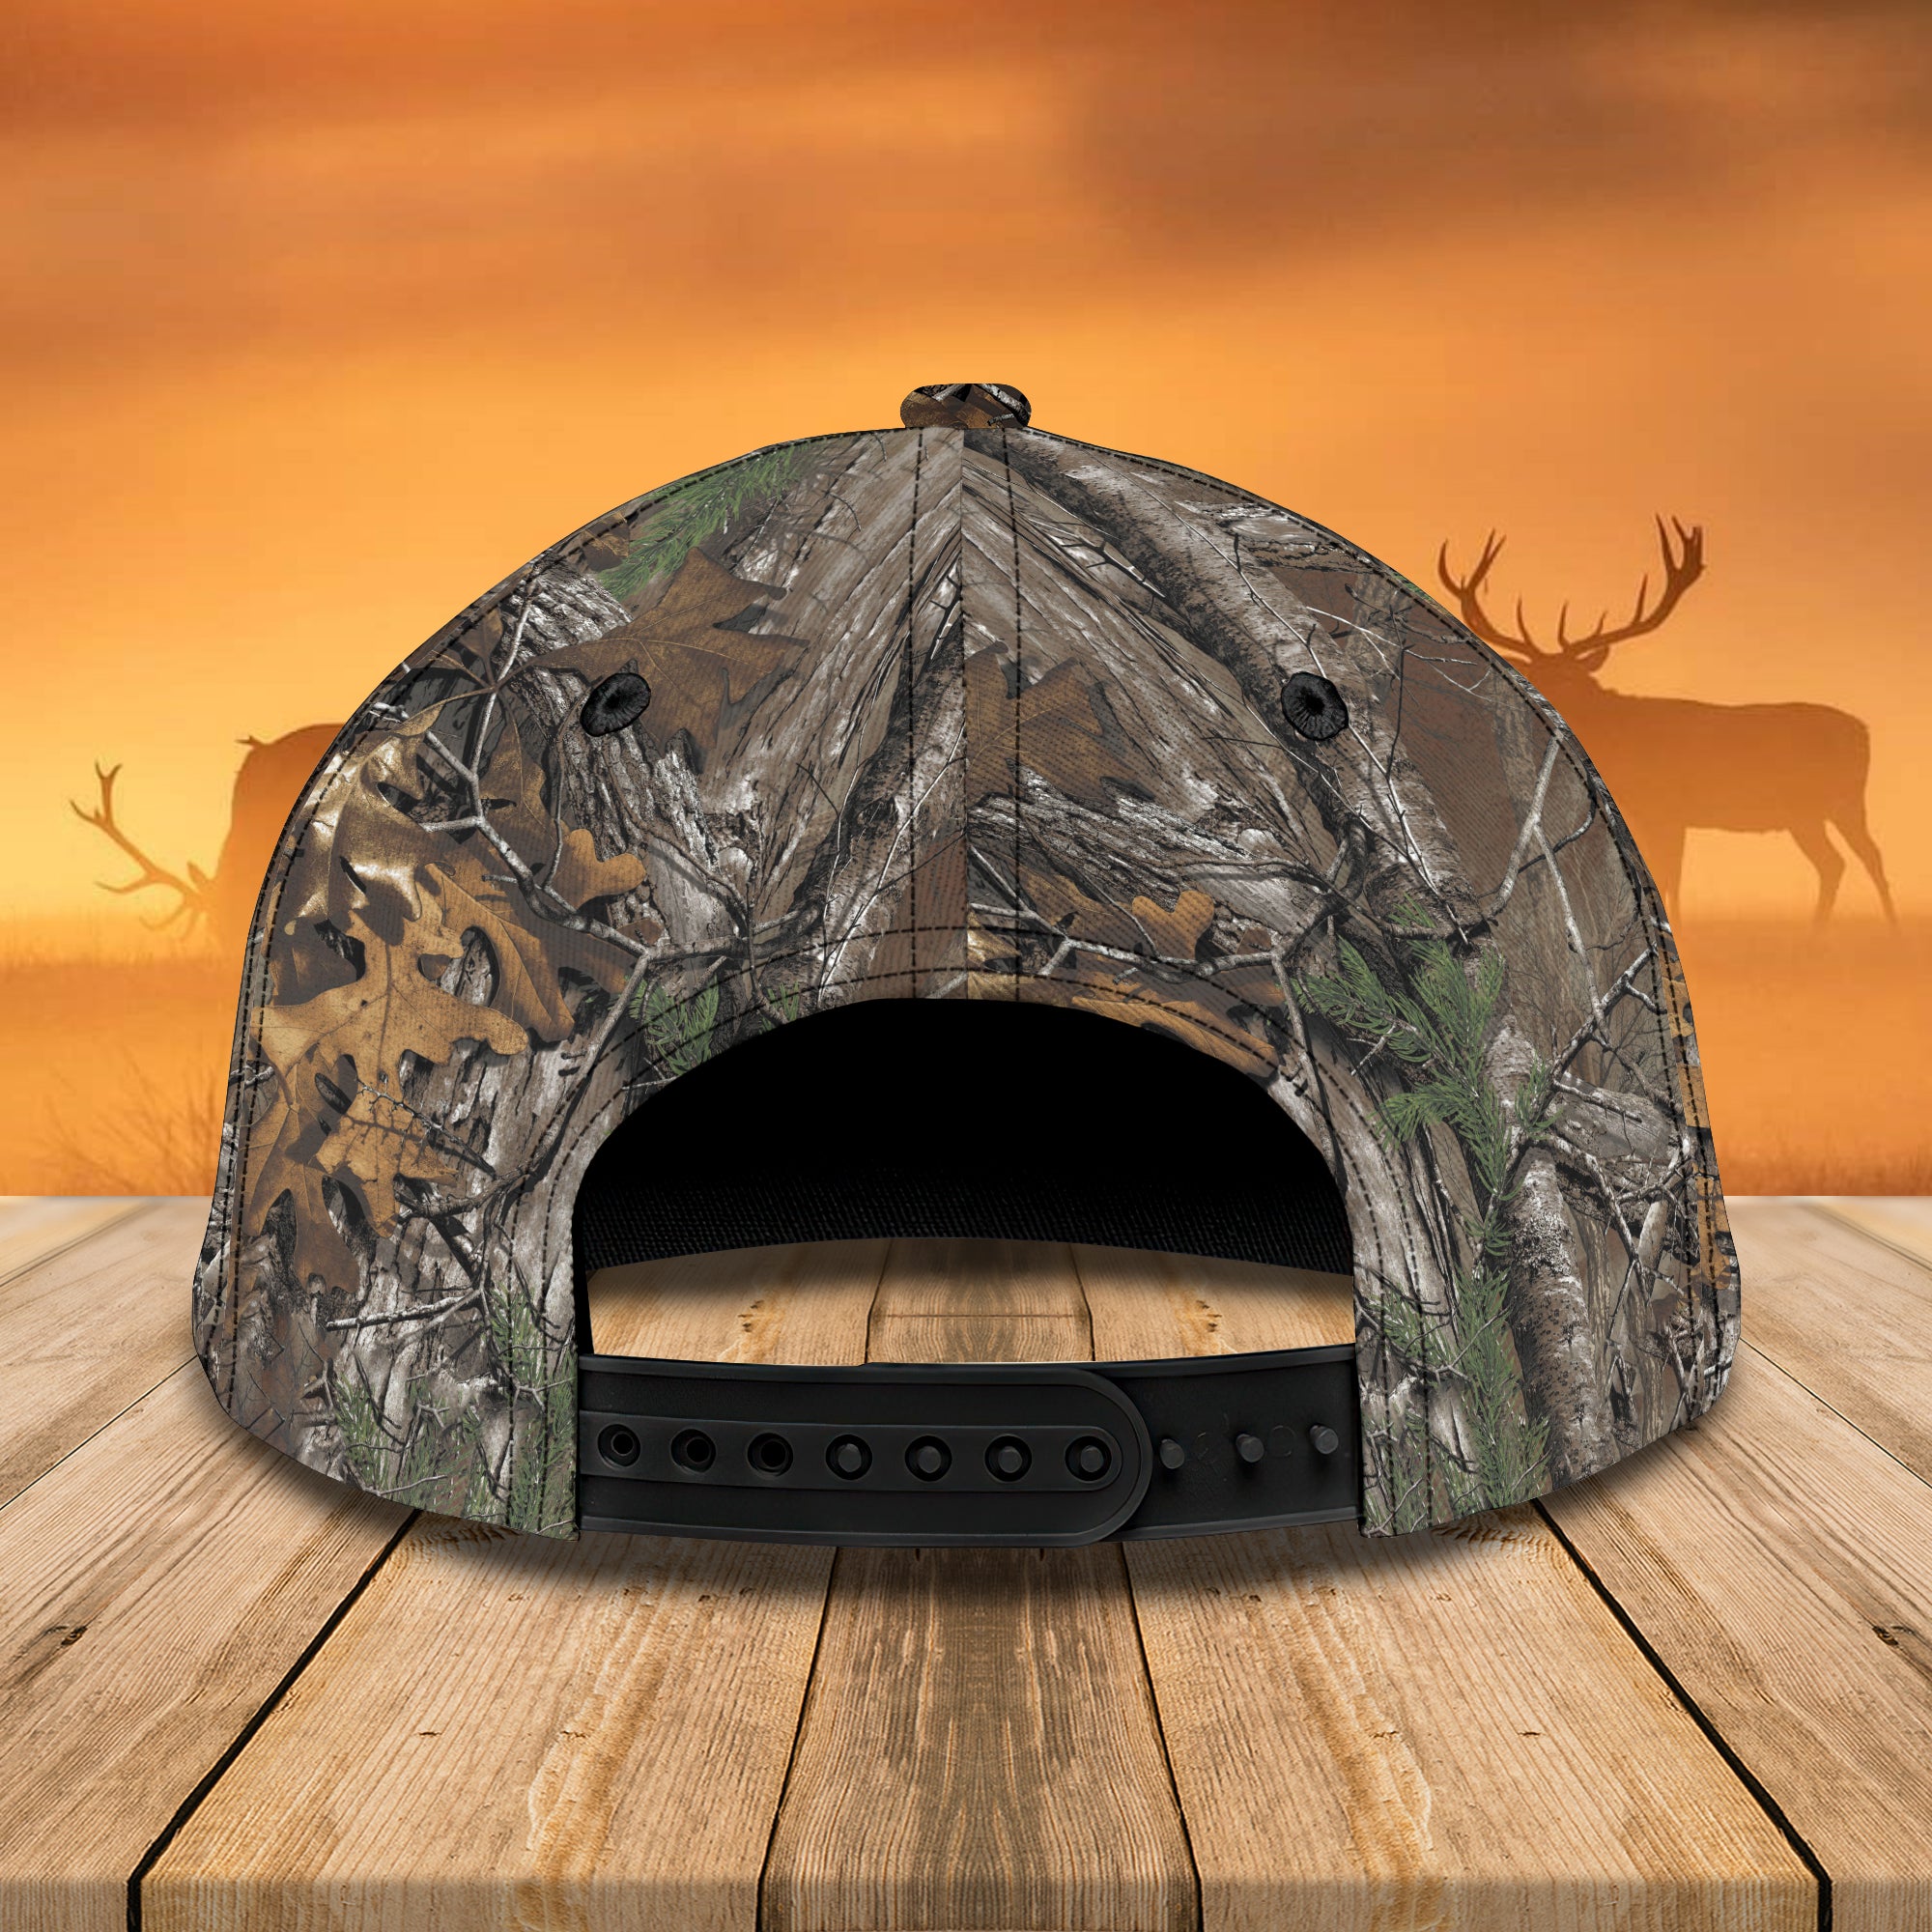 Deer Hunting - Bow Hunting 2 - Personalized Name Cap 8 - Nvc97